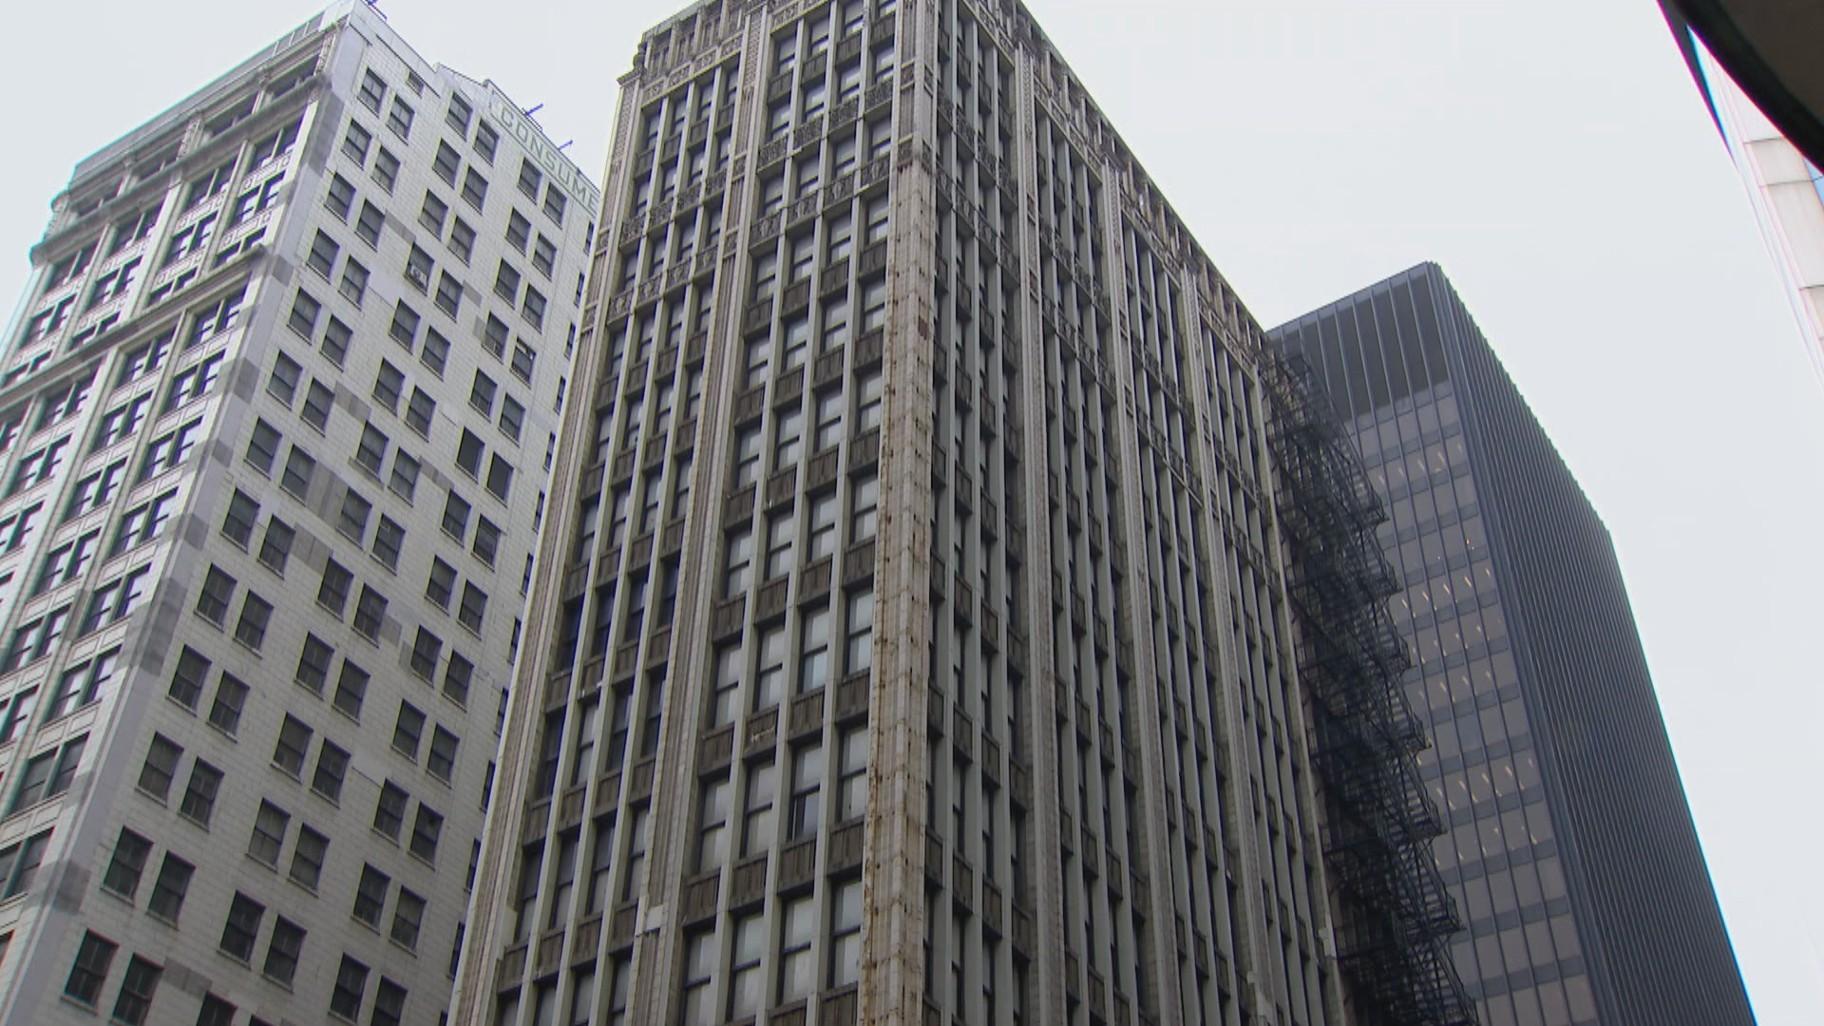 Buildings at 220 S. State St. and 202 S. State St. are being recommended for demolition as part of a security plan for the Dirksen Federal Building. (WTTW News)